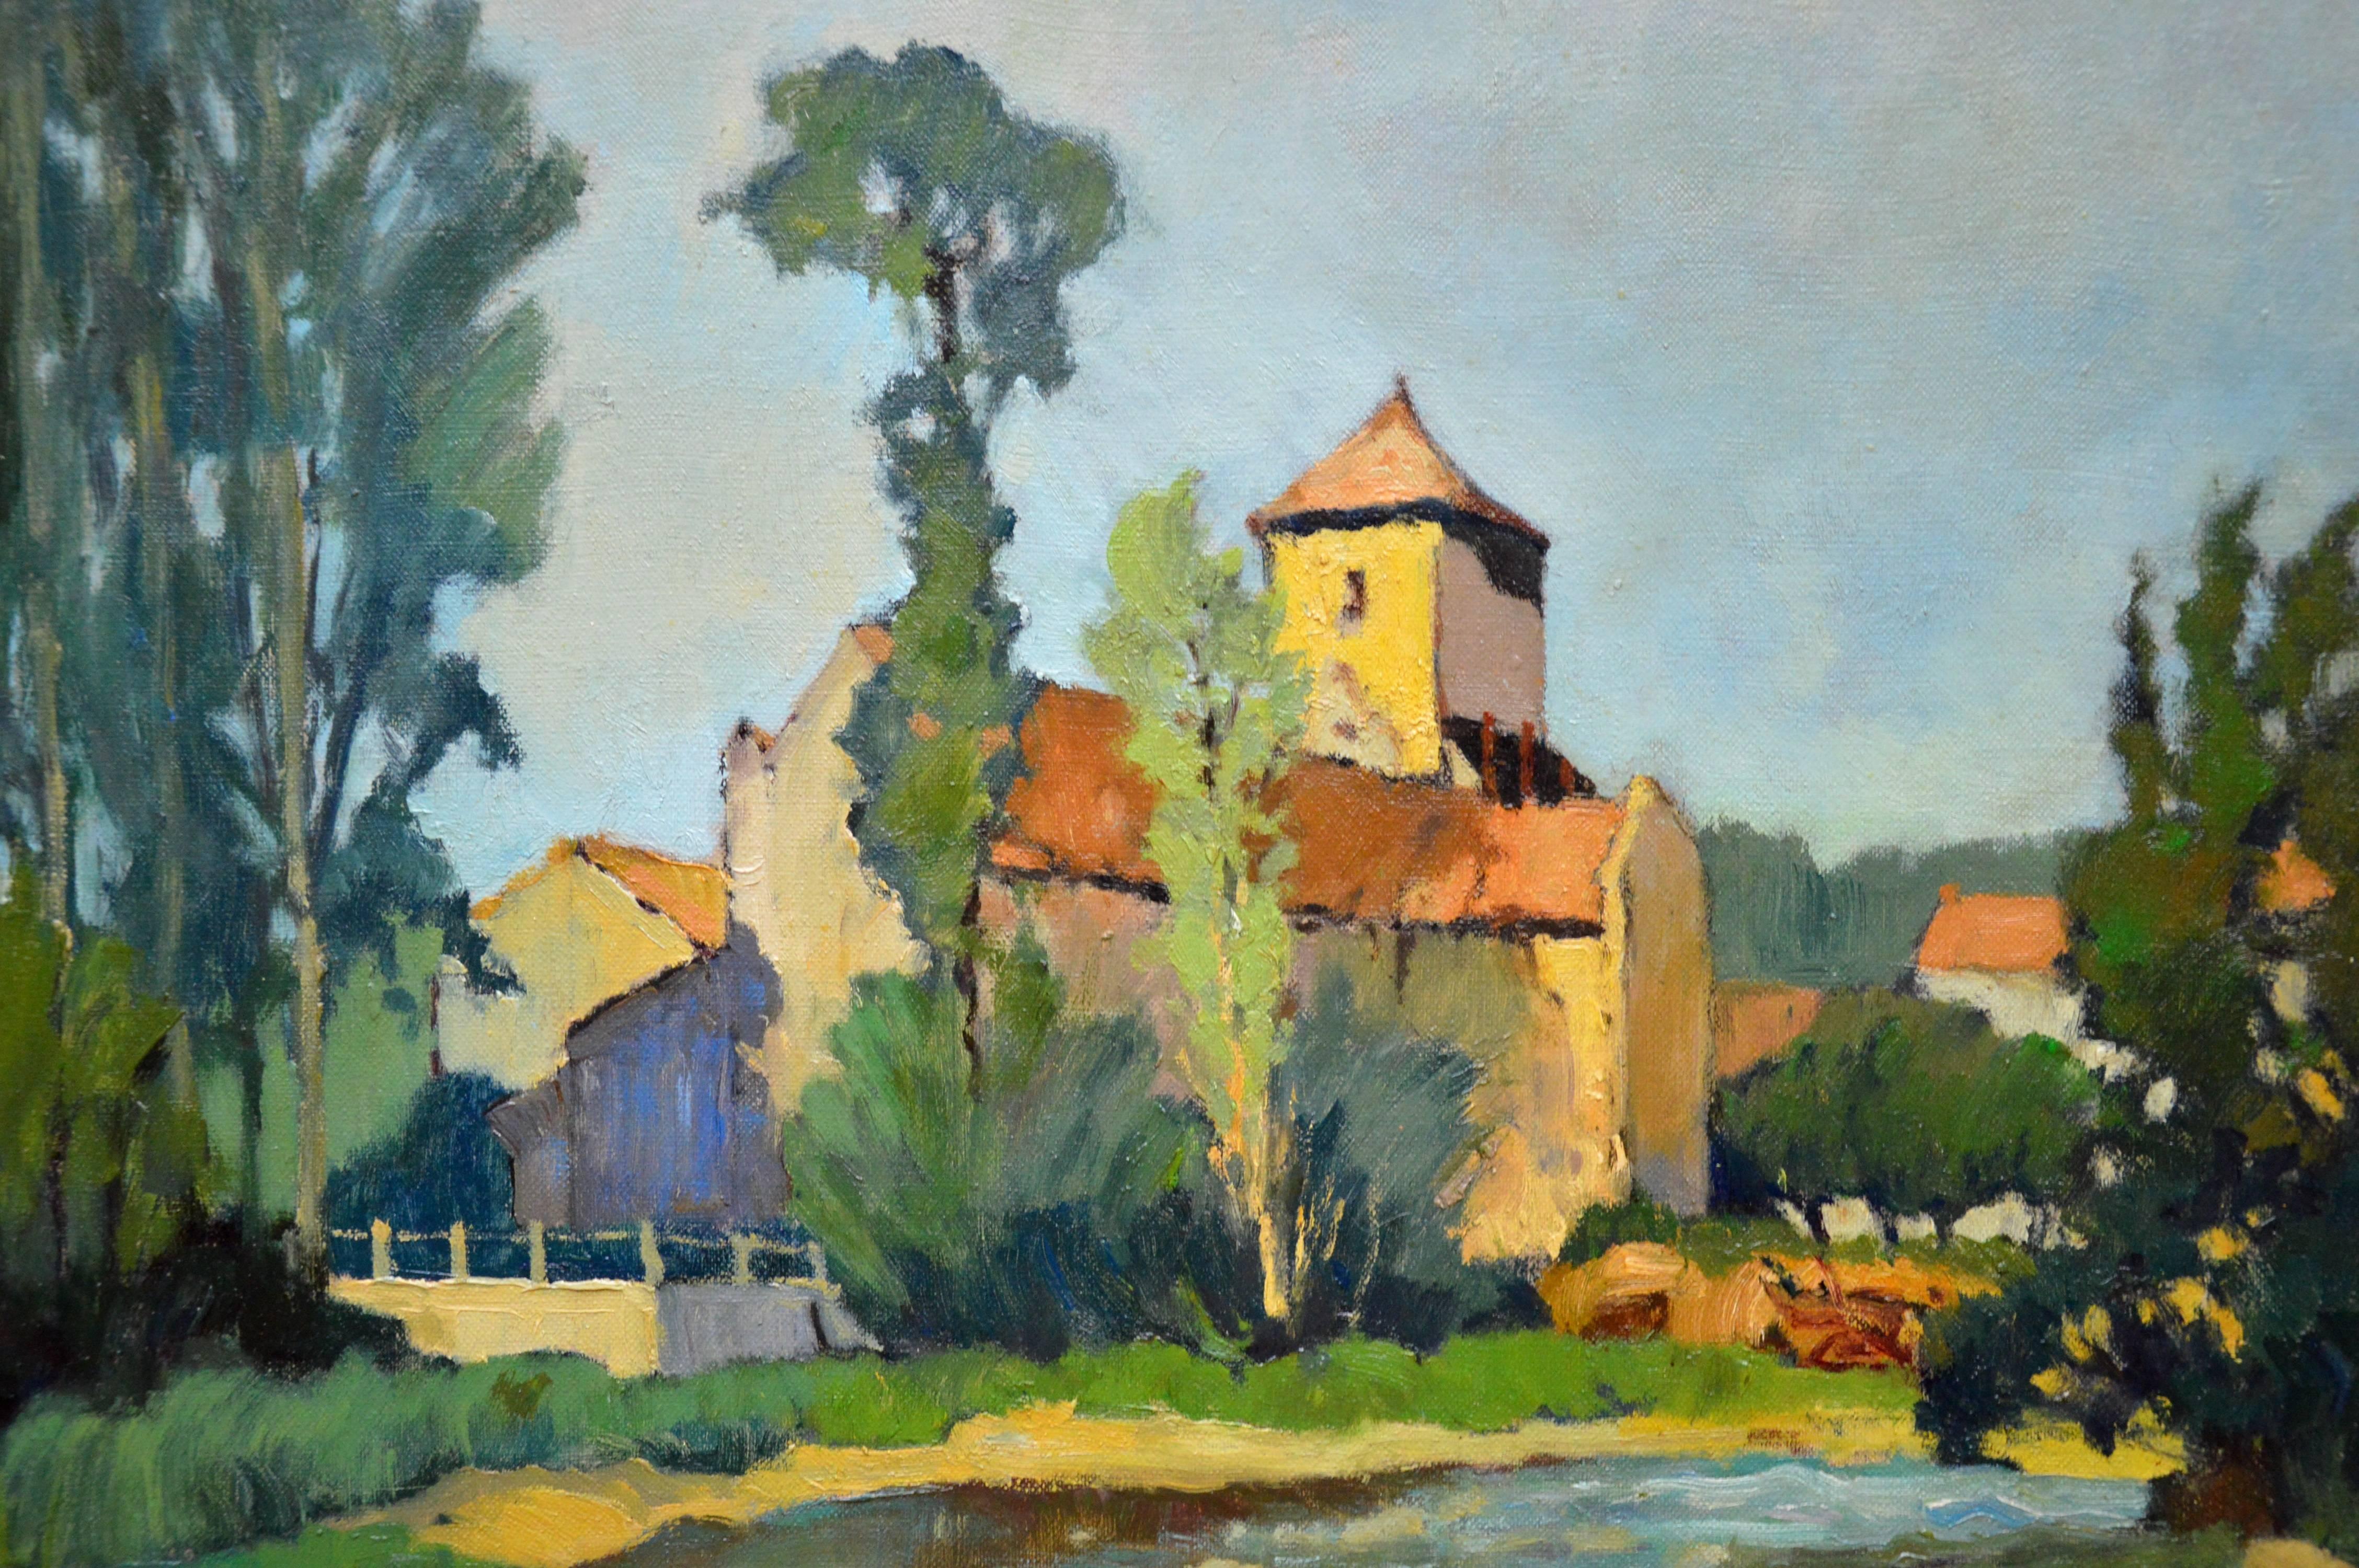 This is a fine original French Post-Impressionist oil on canvas depicting a view of the village of ‘Saint-Macoux’ on the River Charente in the Vienne department of Western France by the eminent Post-Impressionist painter Georges Charles Robin